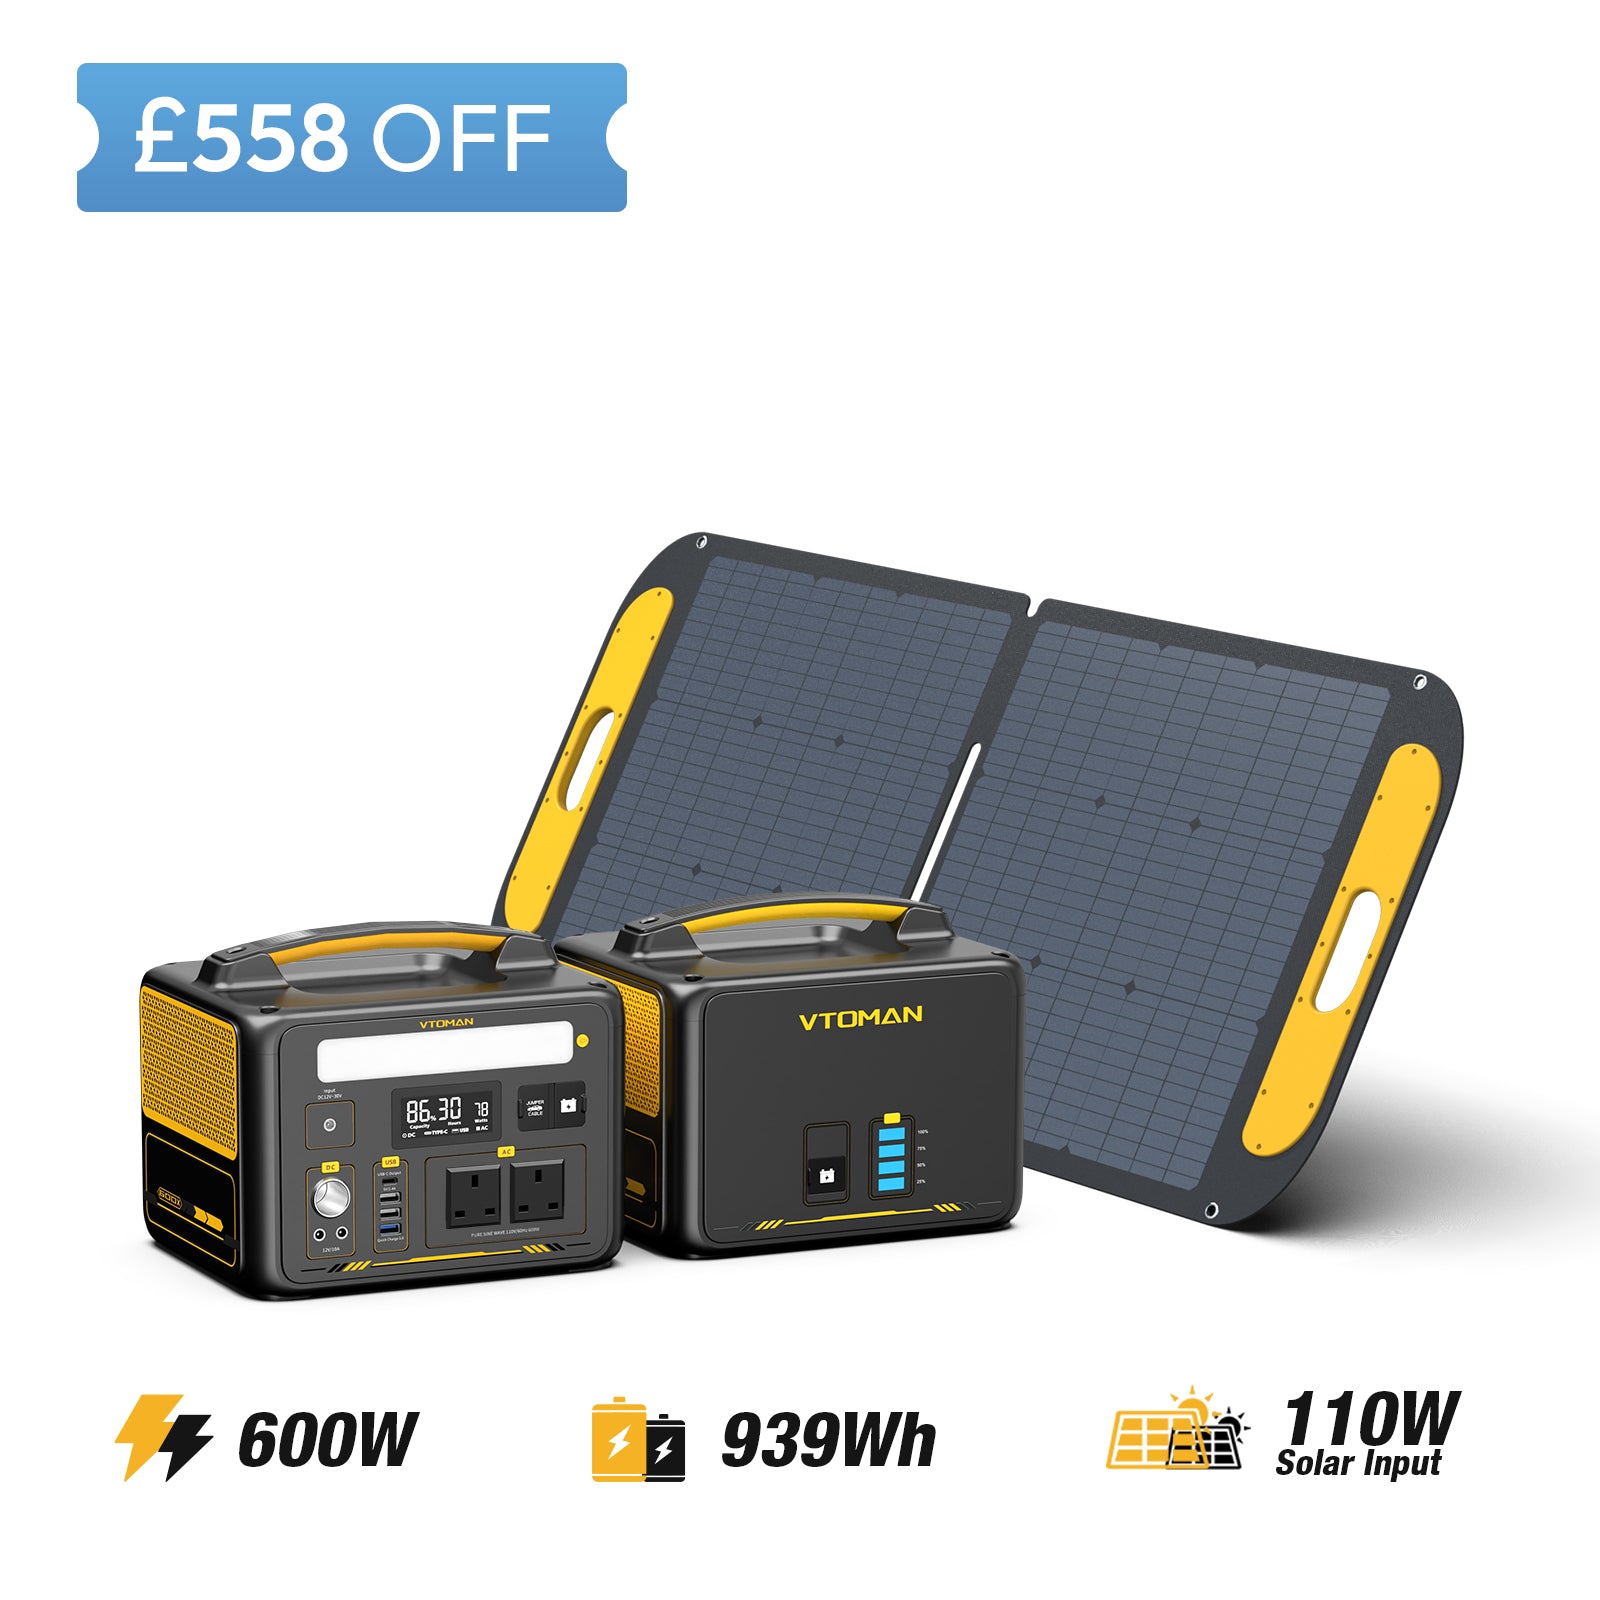 Jump 600X and 640wh extra battery and 110W solar panel save £558 in summer sale